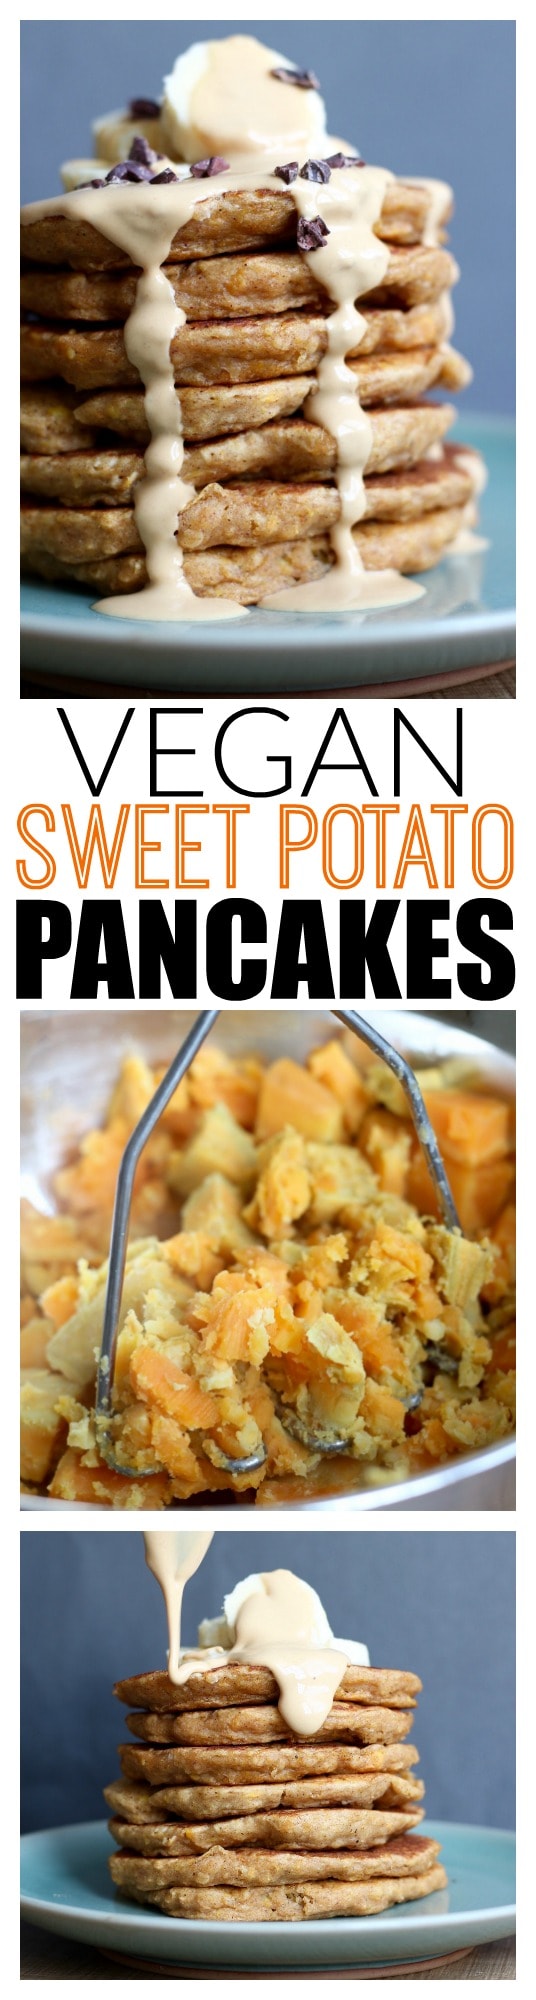 THE BEST Vegan Sweet Potato Pancakes! These healthy and hearty Vegan Sweet Potato Pancakes are worth the effort and make for delicious, simple breakfasts throughout the week!